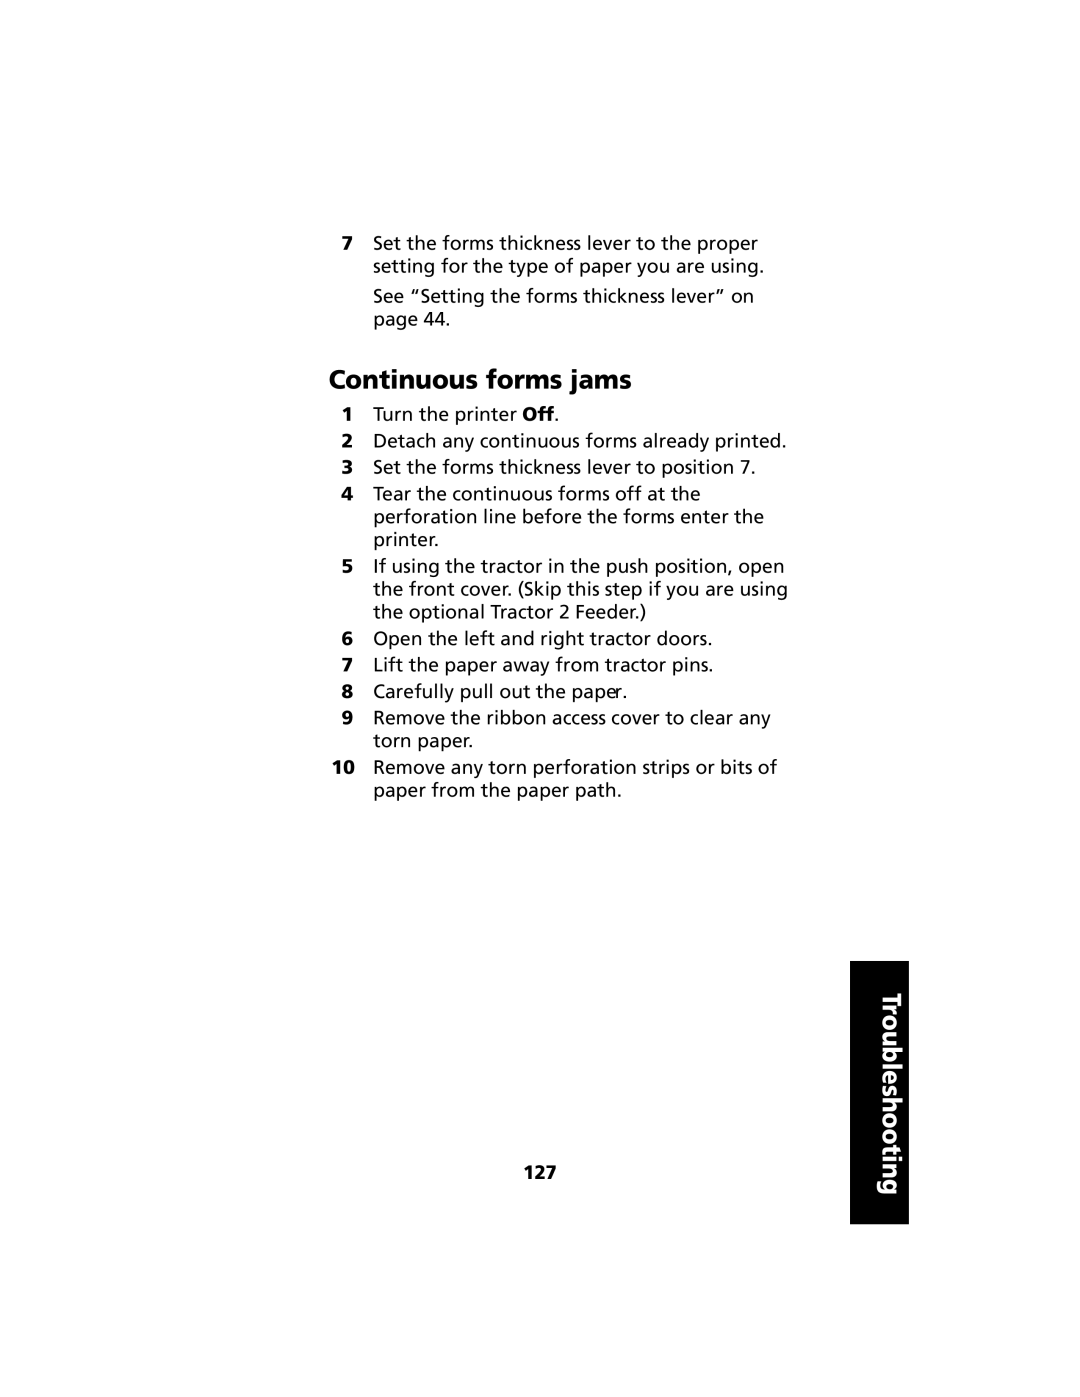 Lexmark 2480 manual Continuous forms jams, Troubleshooting 